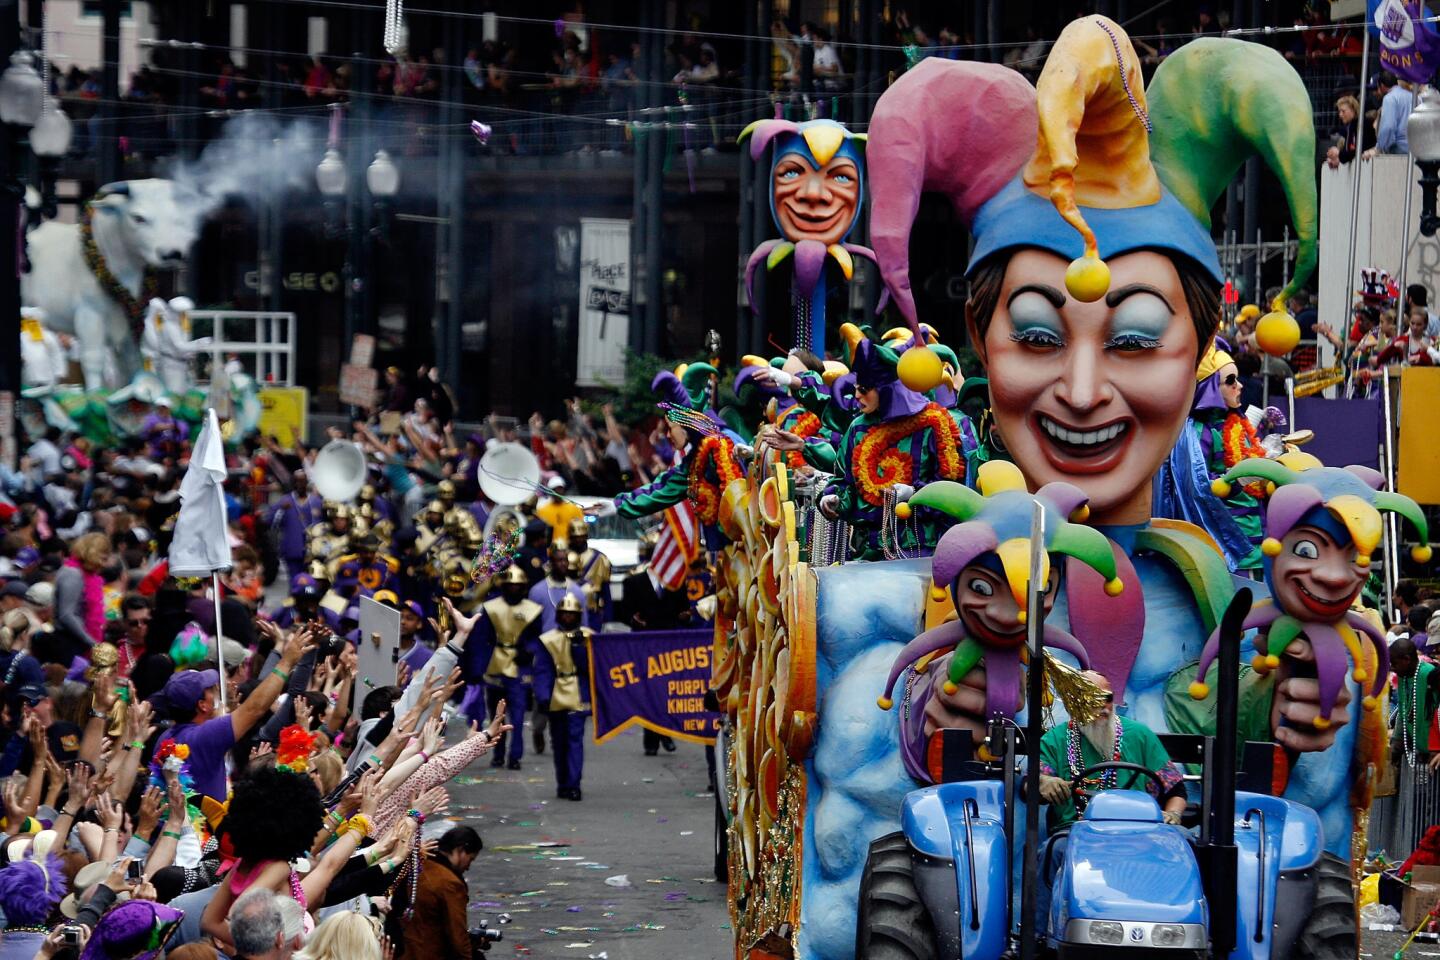 It's party time in New Orleans, which is turning 300